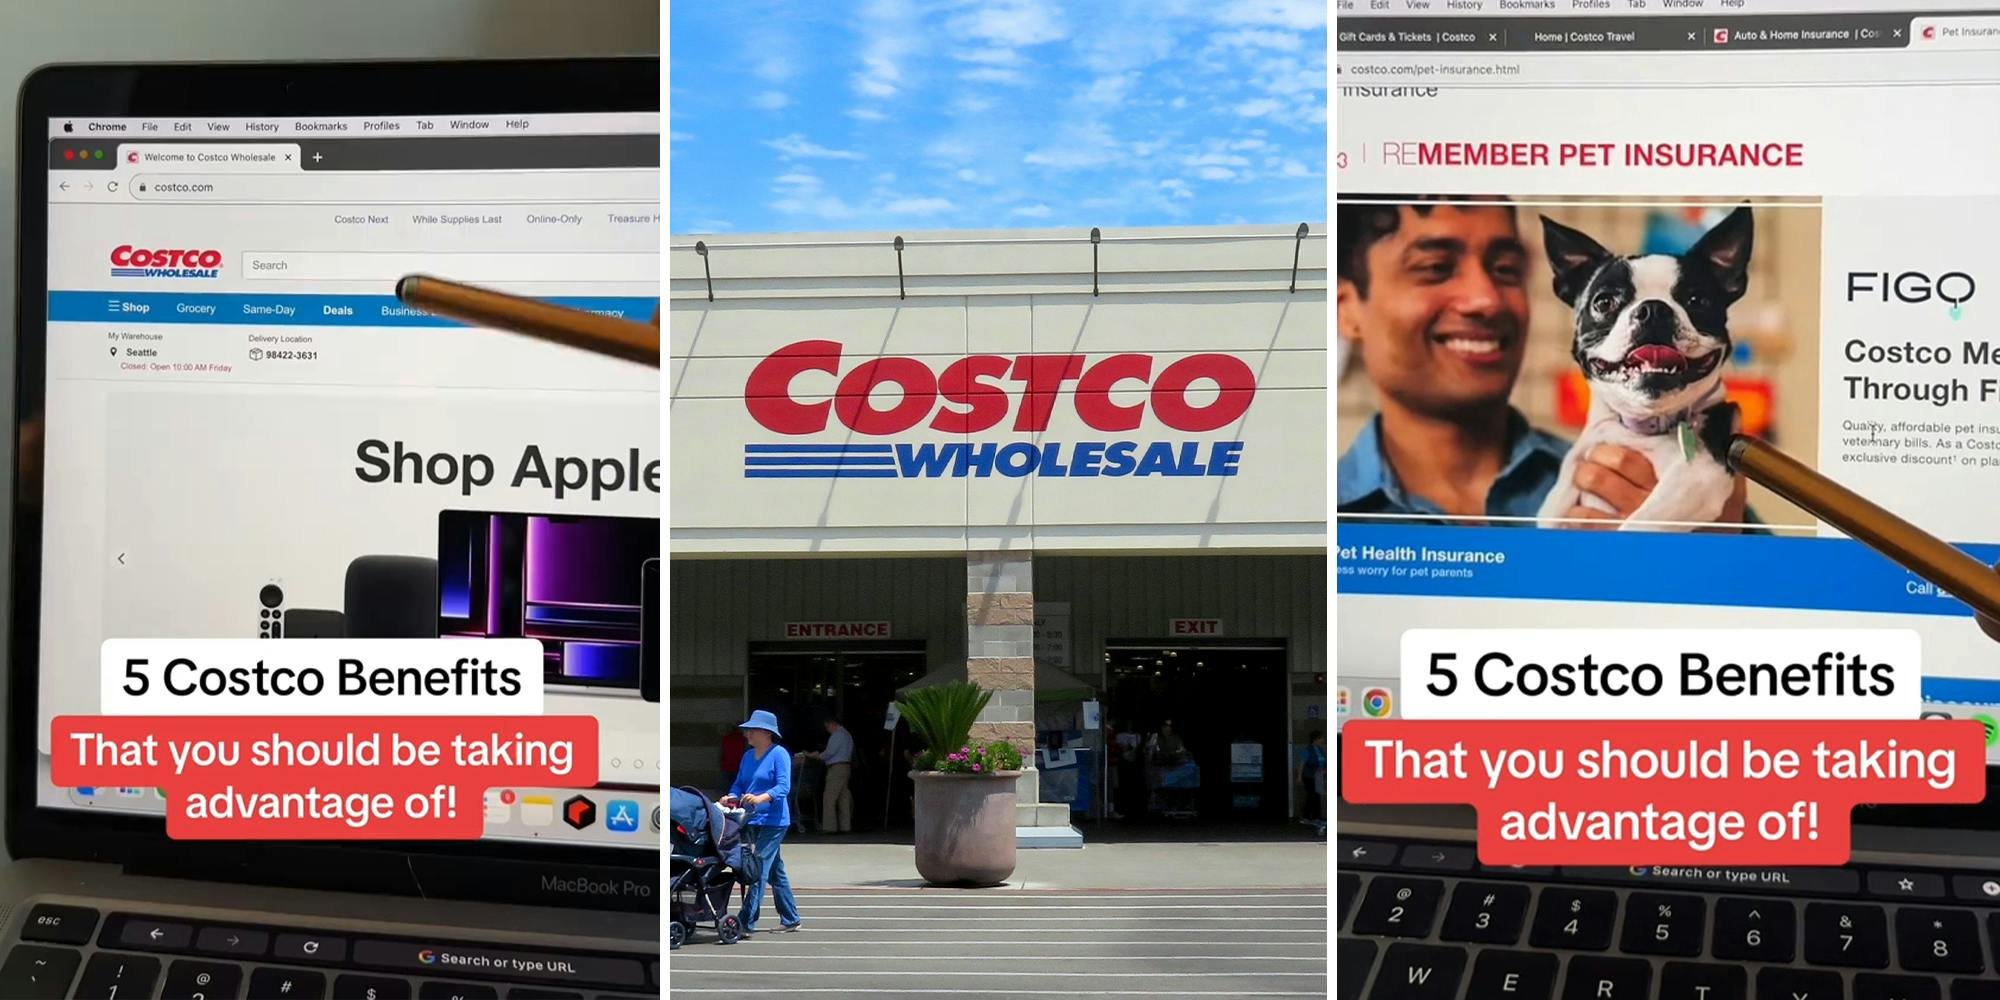 ‘You’re not taking full advantage of your Costco membership’: Costco customer shares 5 hidden corners of the website